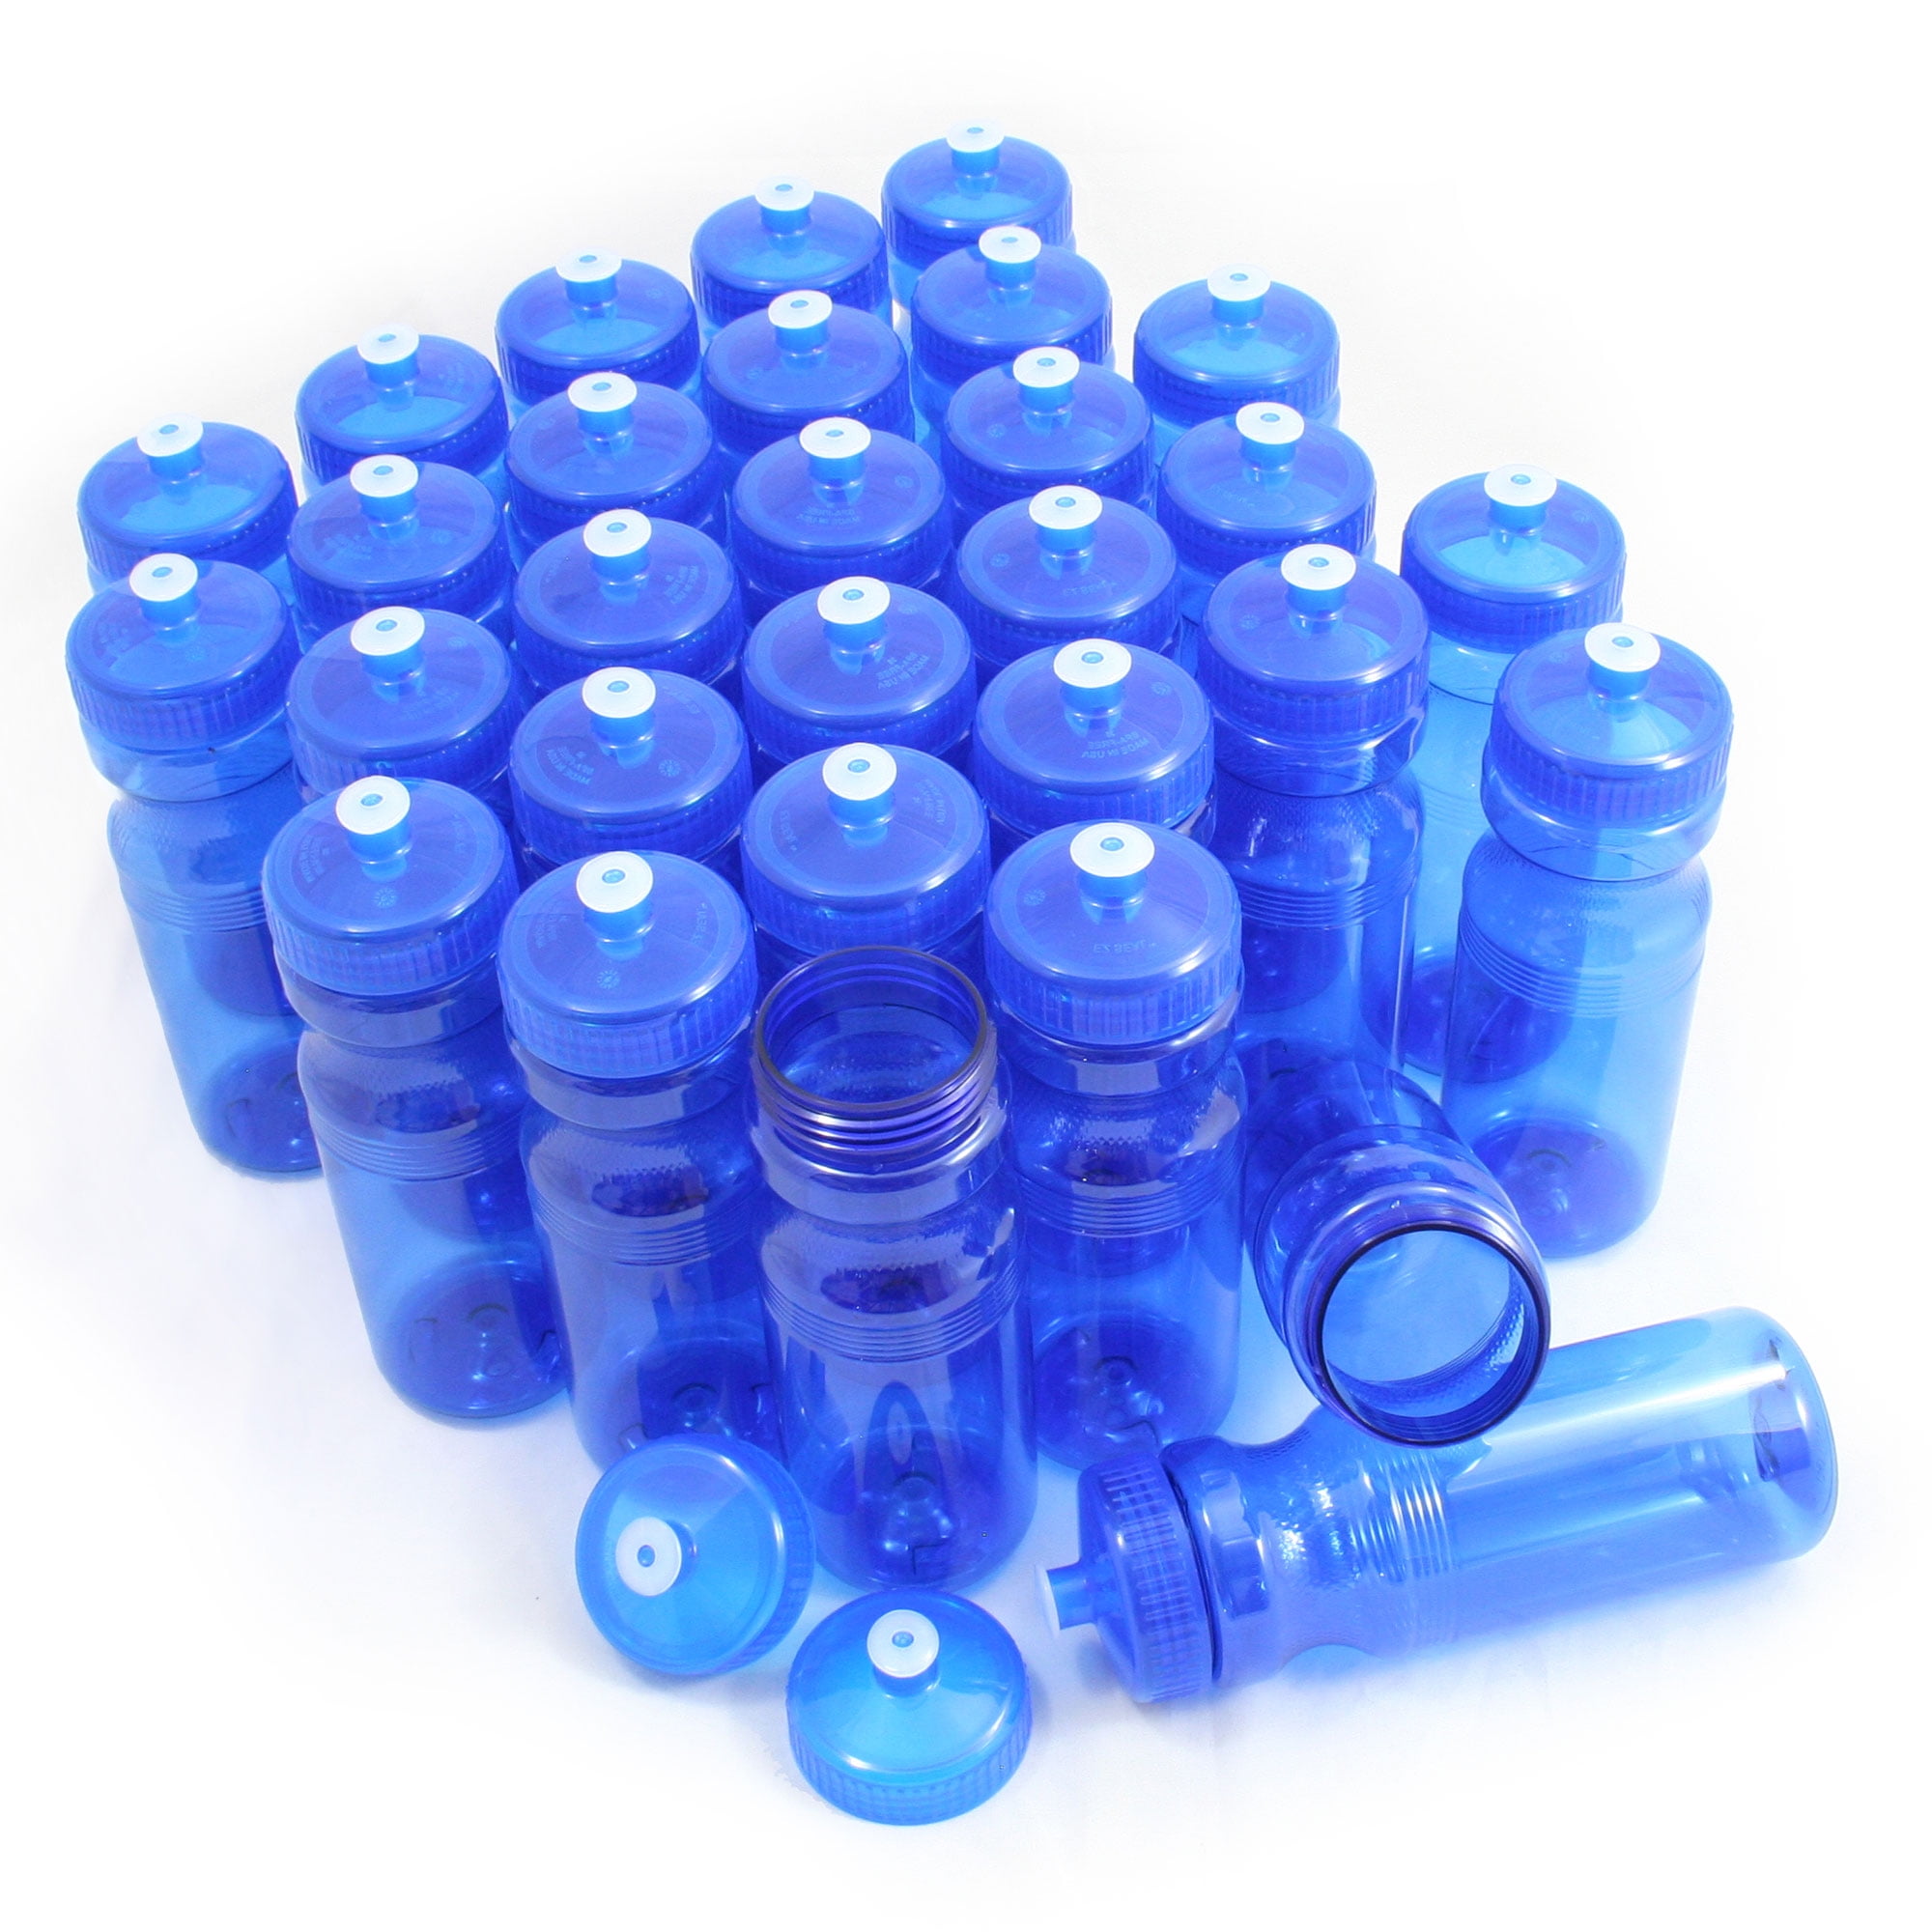  CSBD 24 oz. Bulk Water Bottles, 10 Pack, Made in USA, Blank  Plastic Reusable Water Bottles for Gym, Cycling, BPA Free, Plastic Water  Bottles Pull Top Cap for Sports, Translucent Blue 